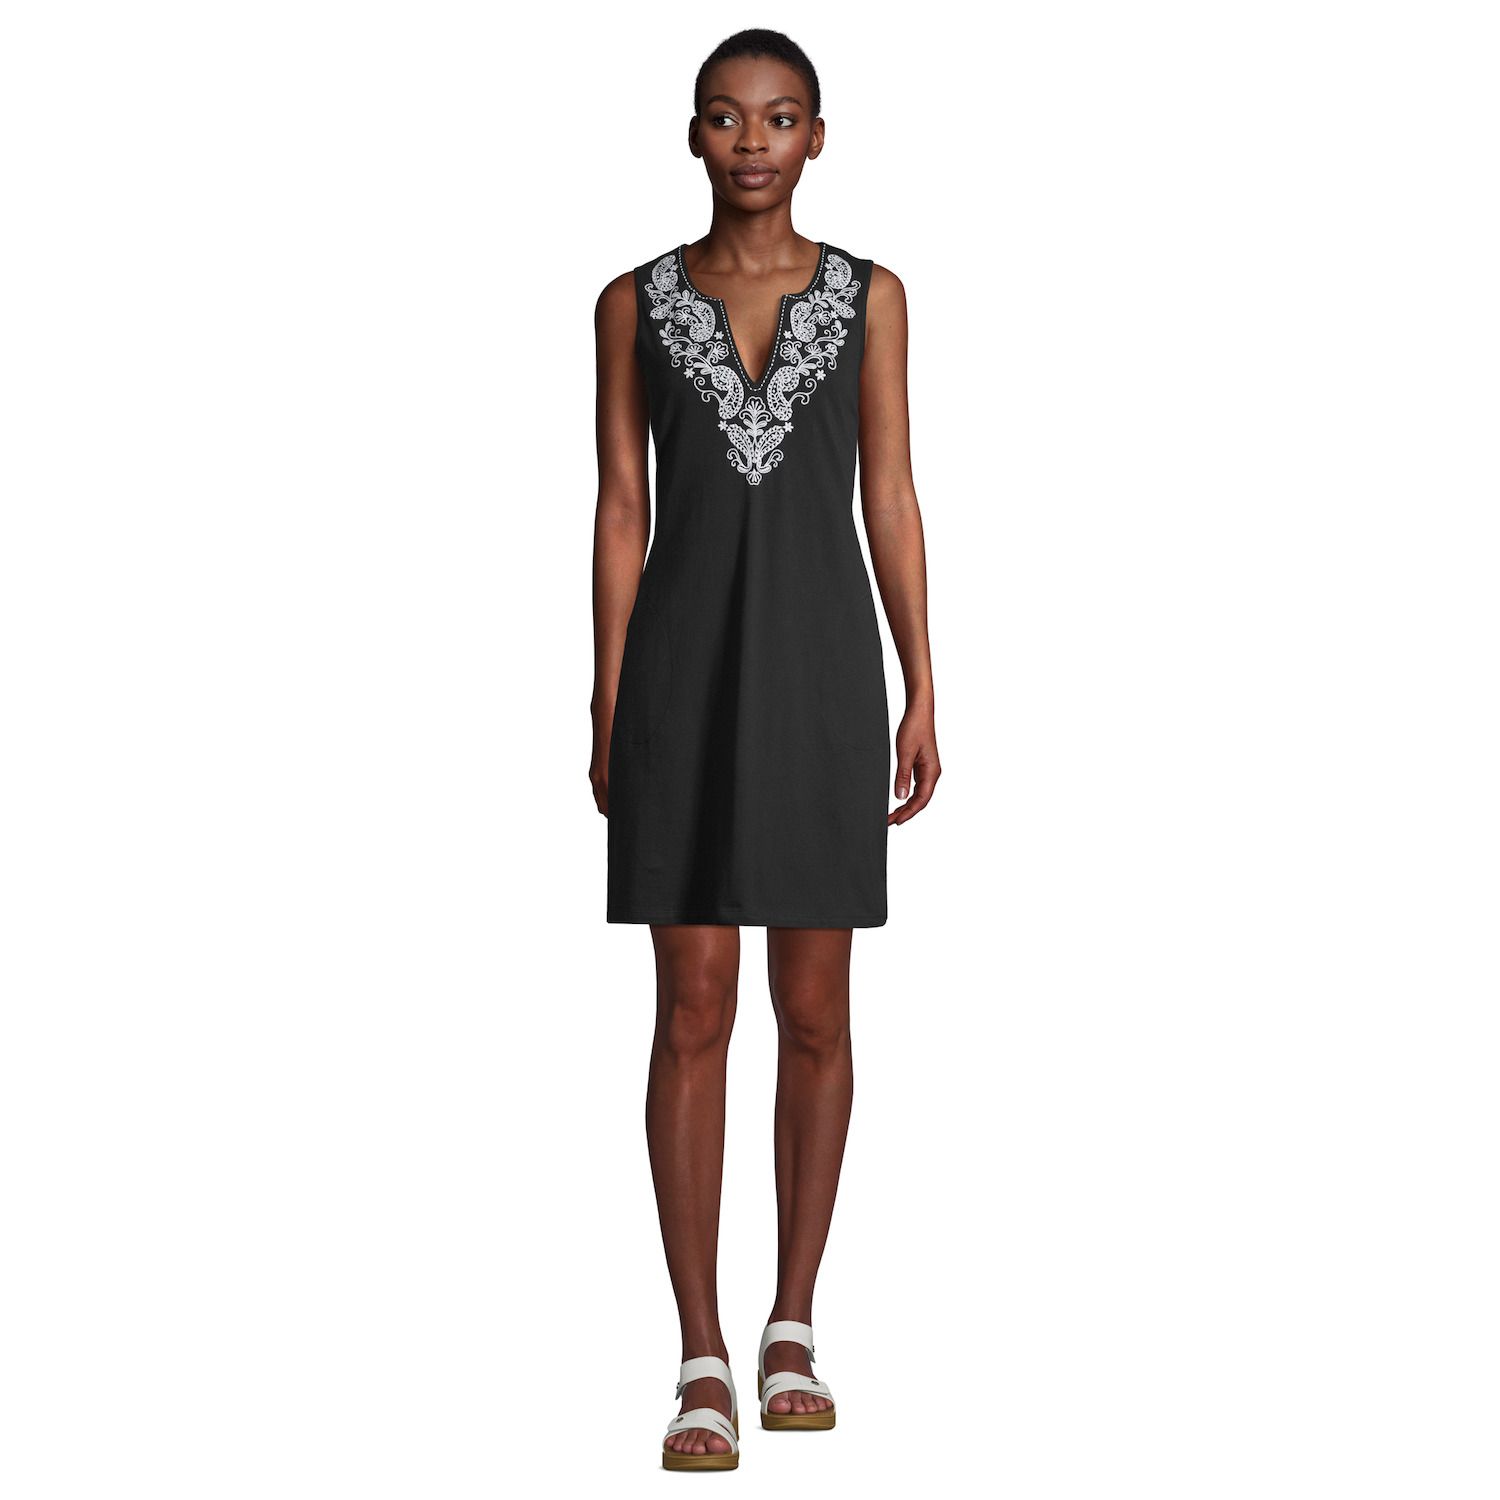 Image for Lands' End Women's Embroidered Sleeveless Swim Cover-up Dress at Kohl's.